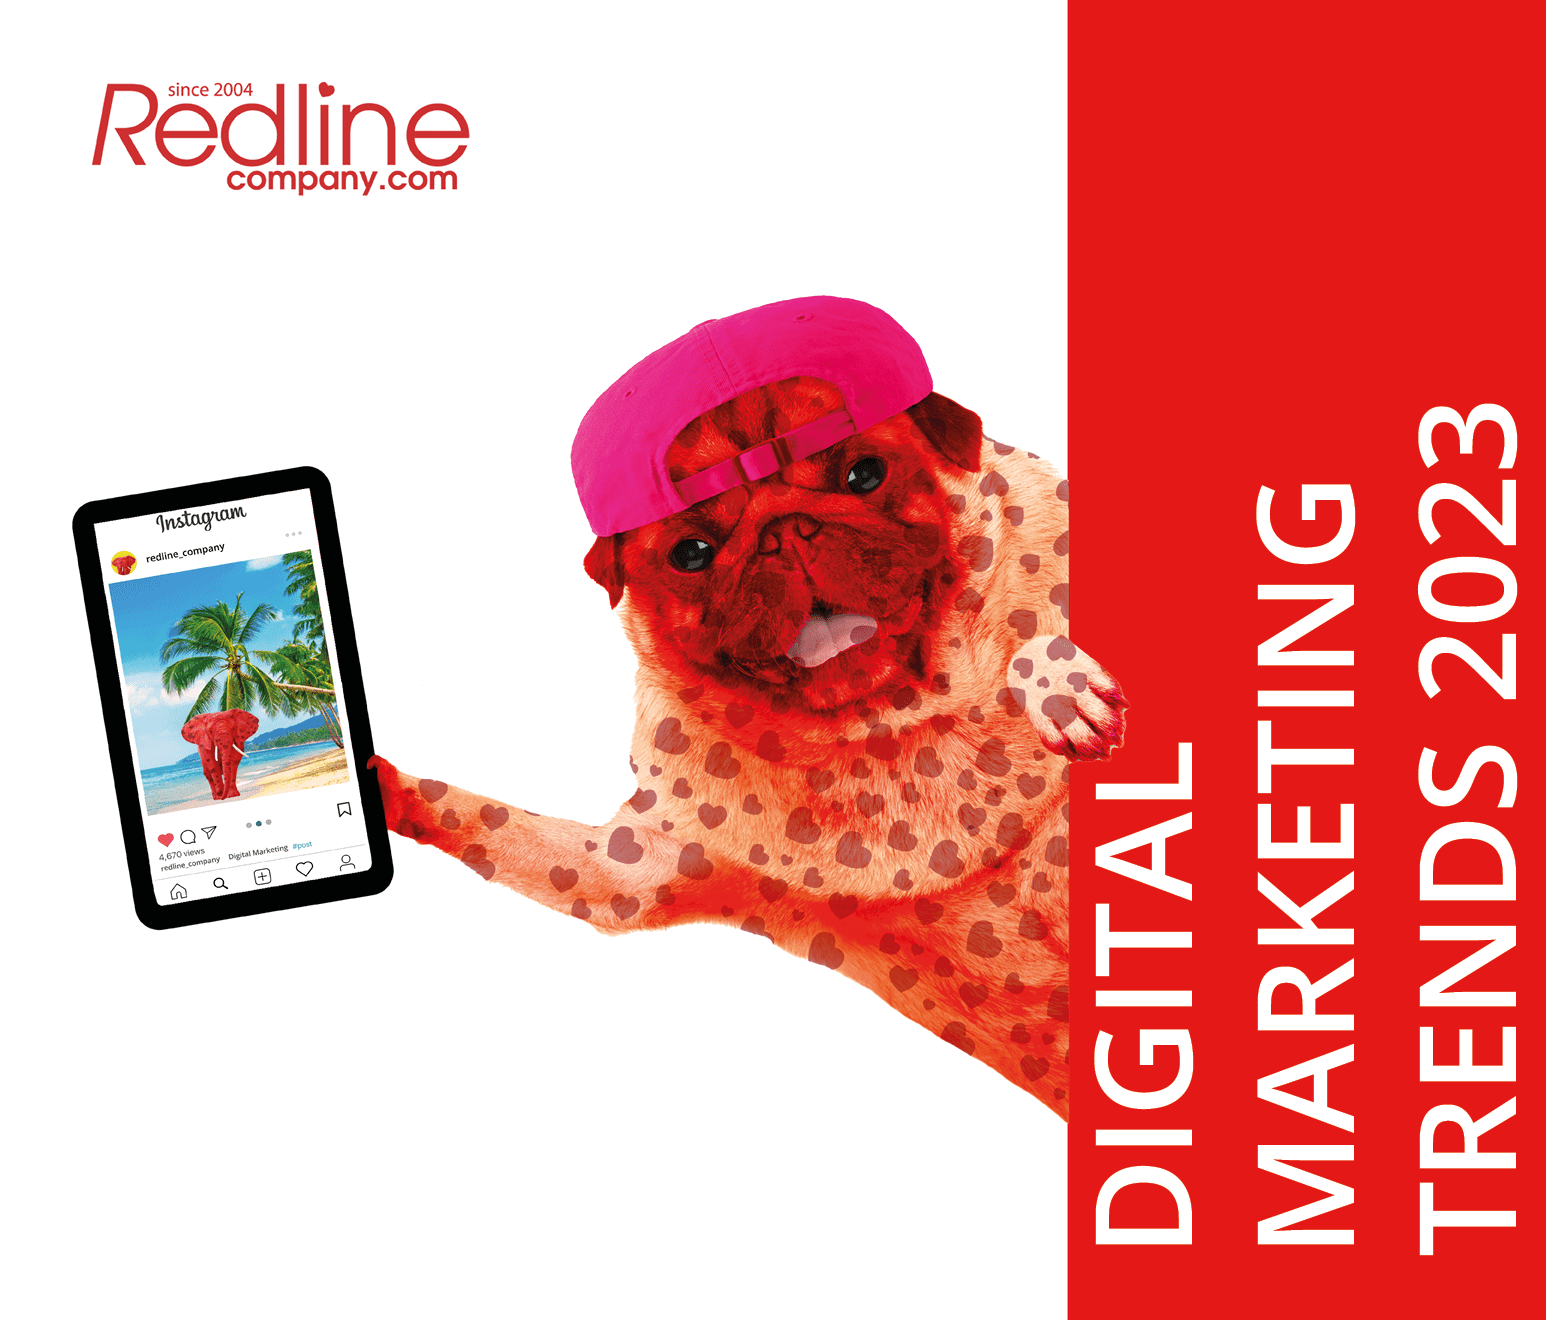 Red hearted dog holding an ipad created by Redline Company